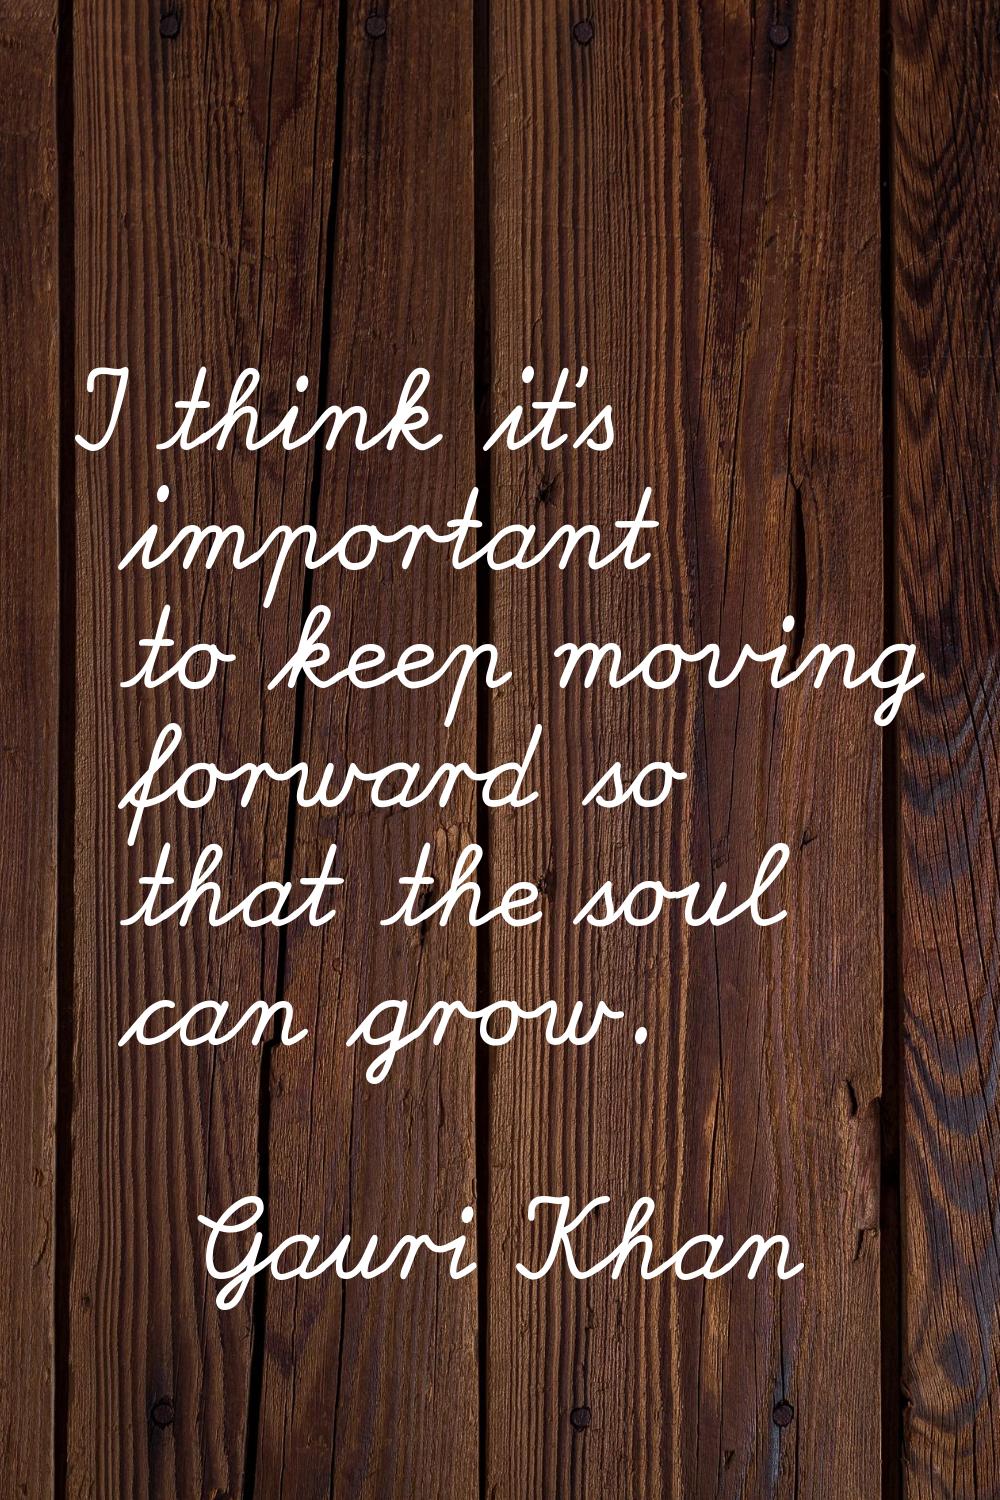 I think it's important to keep moving forward so that the soul can grow.